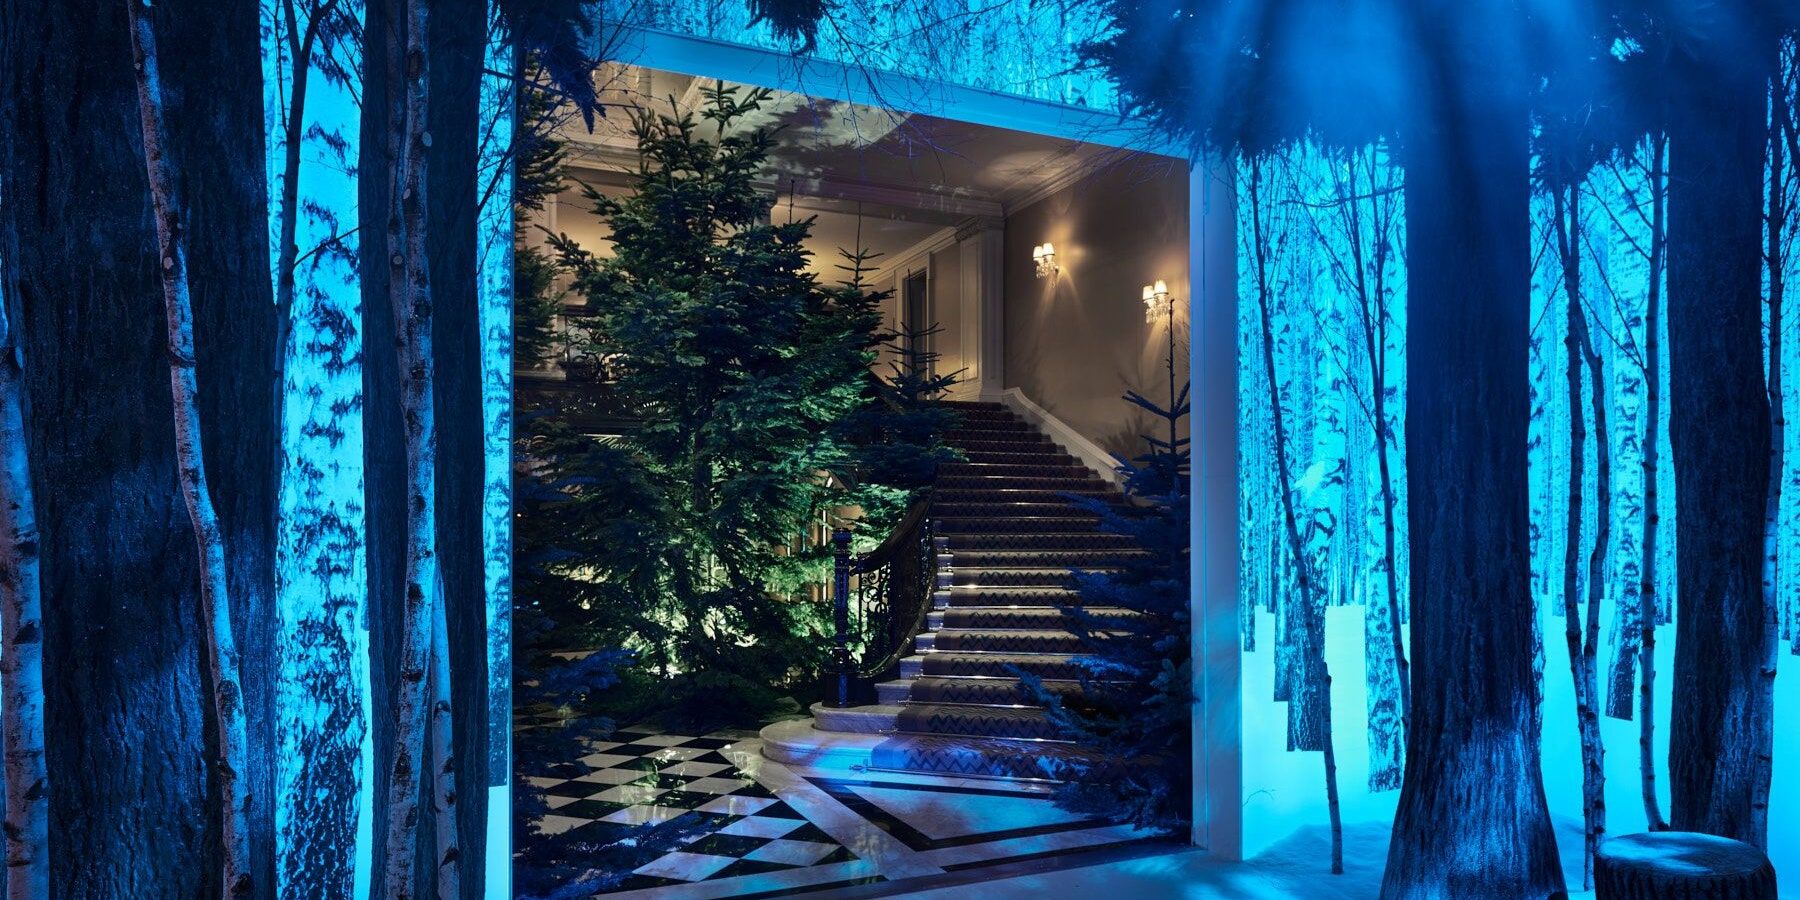 Hotels with Best Christmas Decorations and Holiday Displays